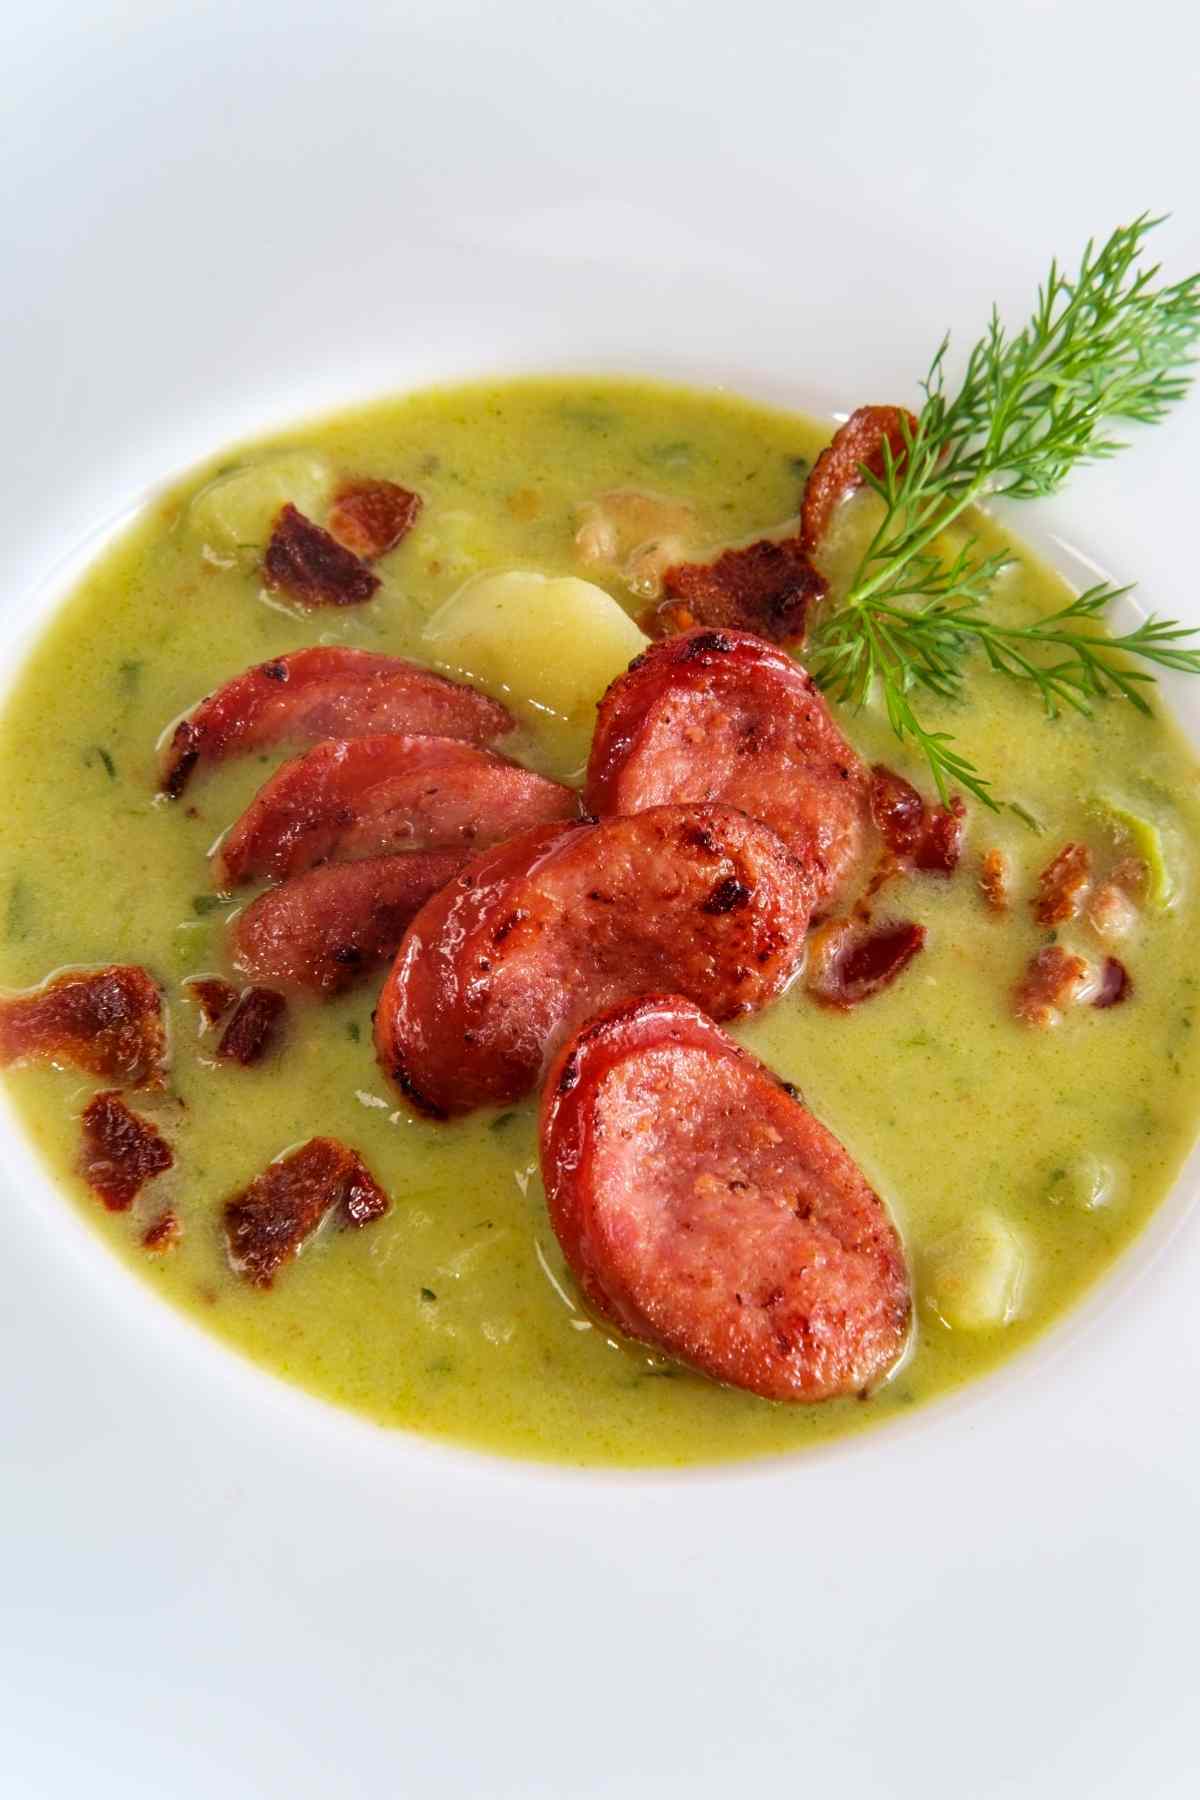 Kielbasa is a delicious type of sausage that can be enjoyed in many dishes. This recipe for crock pot kielbasa is easy to prepare and tastes great!